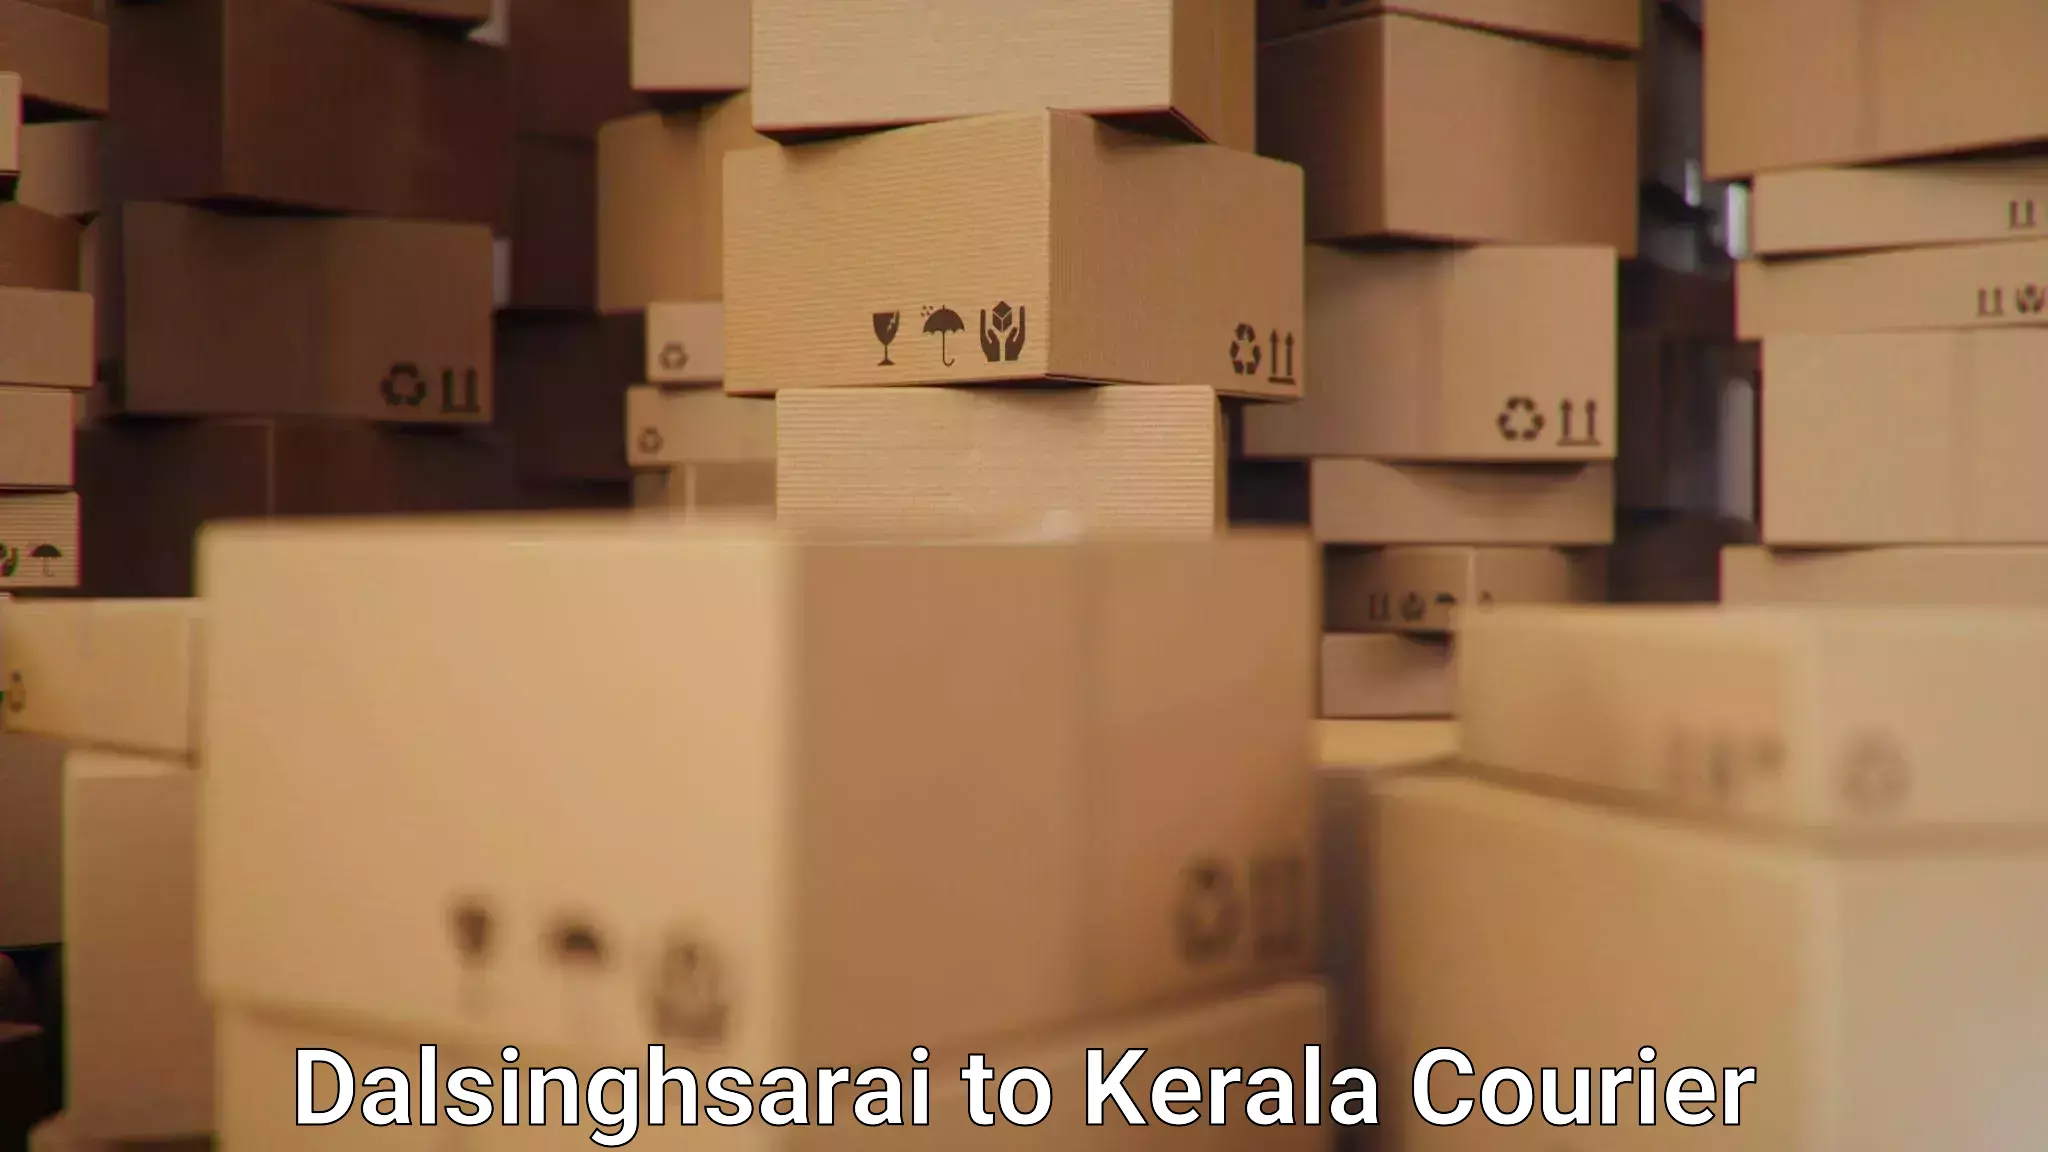 Flexible delivery scheduling Dalsinghsarai to Kerala